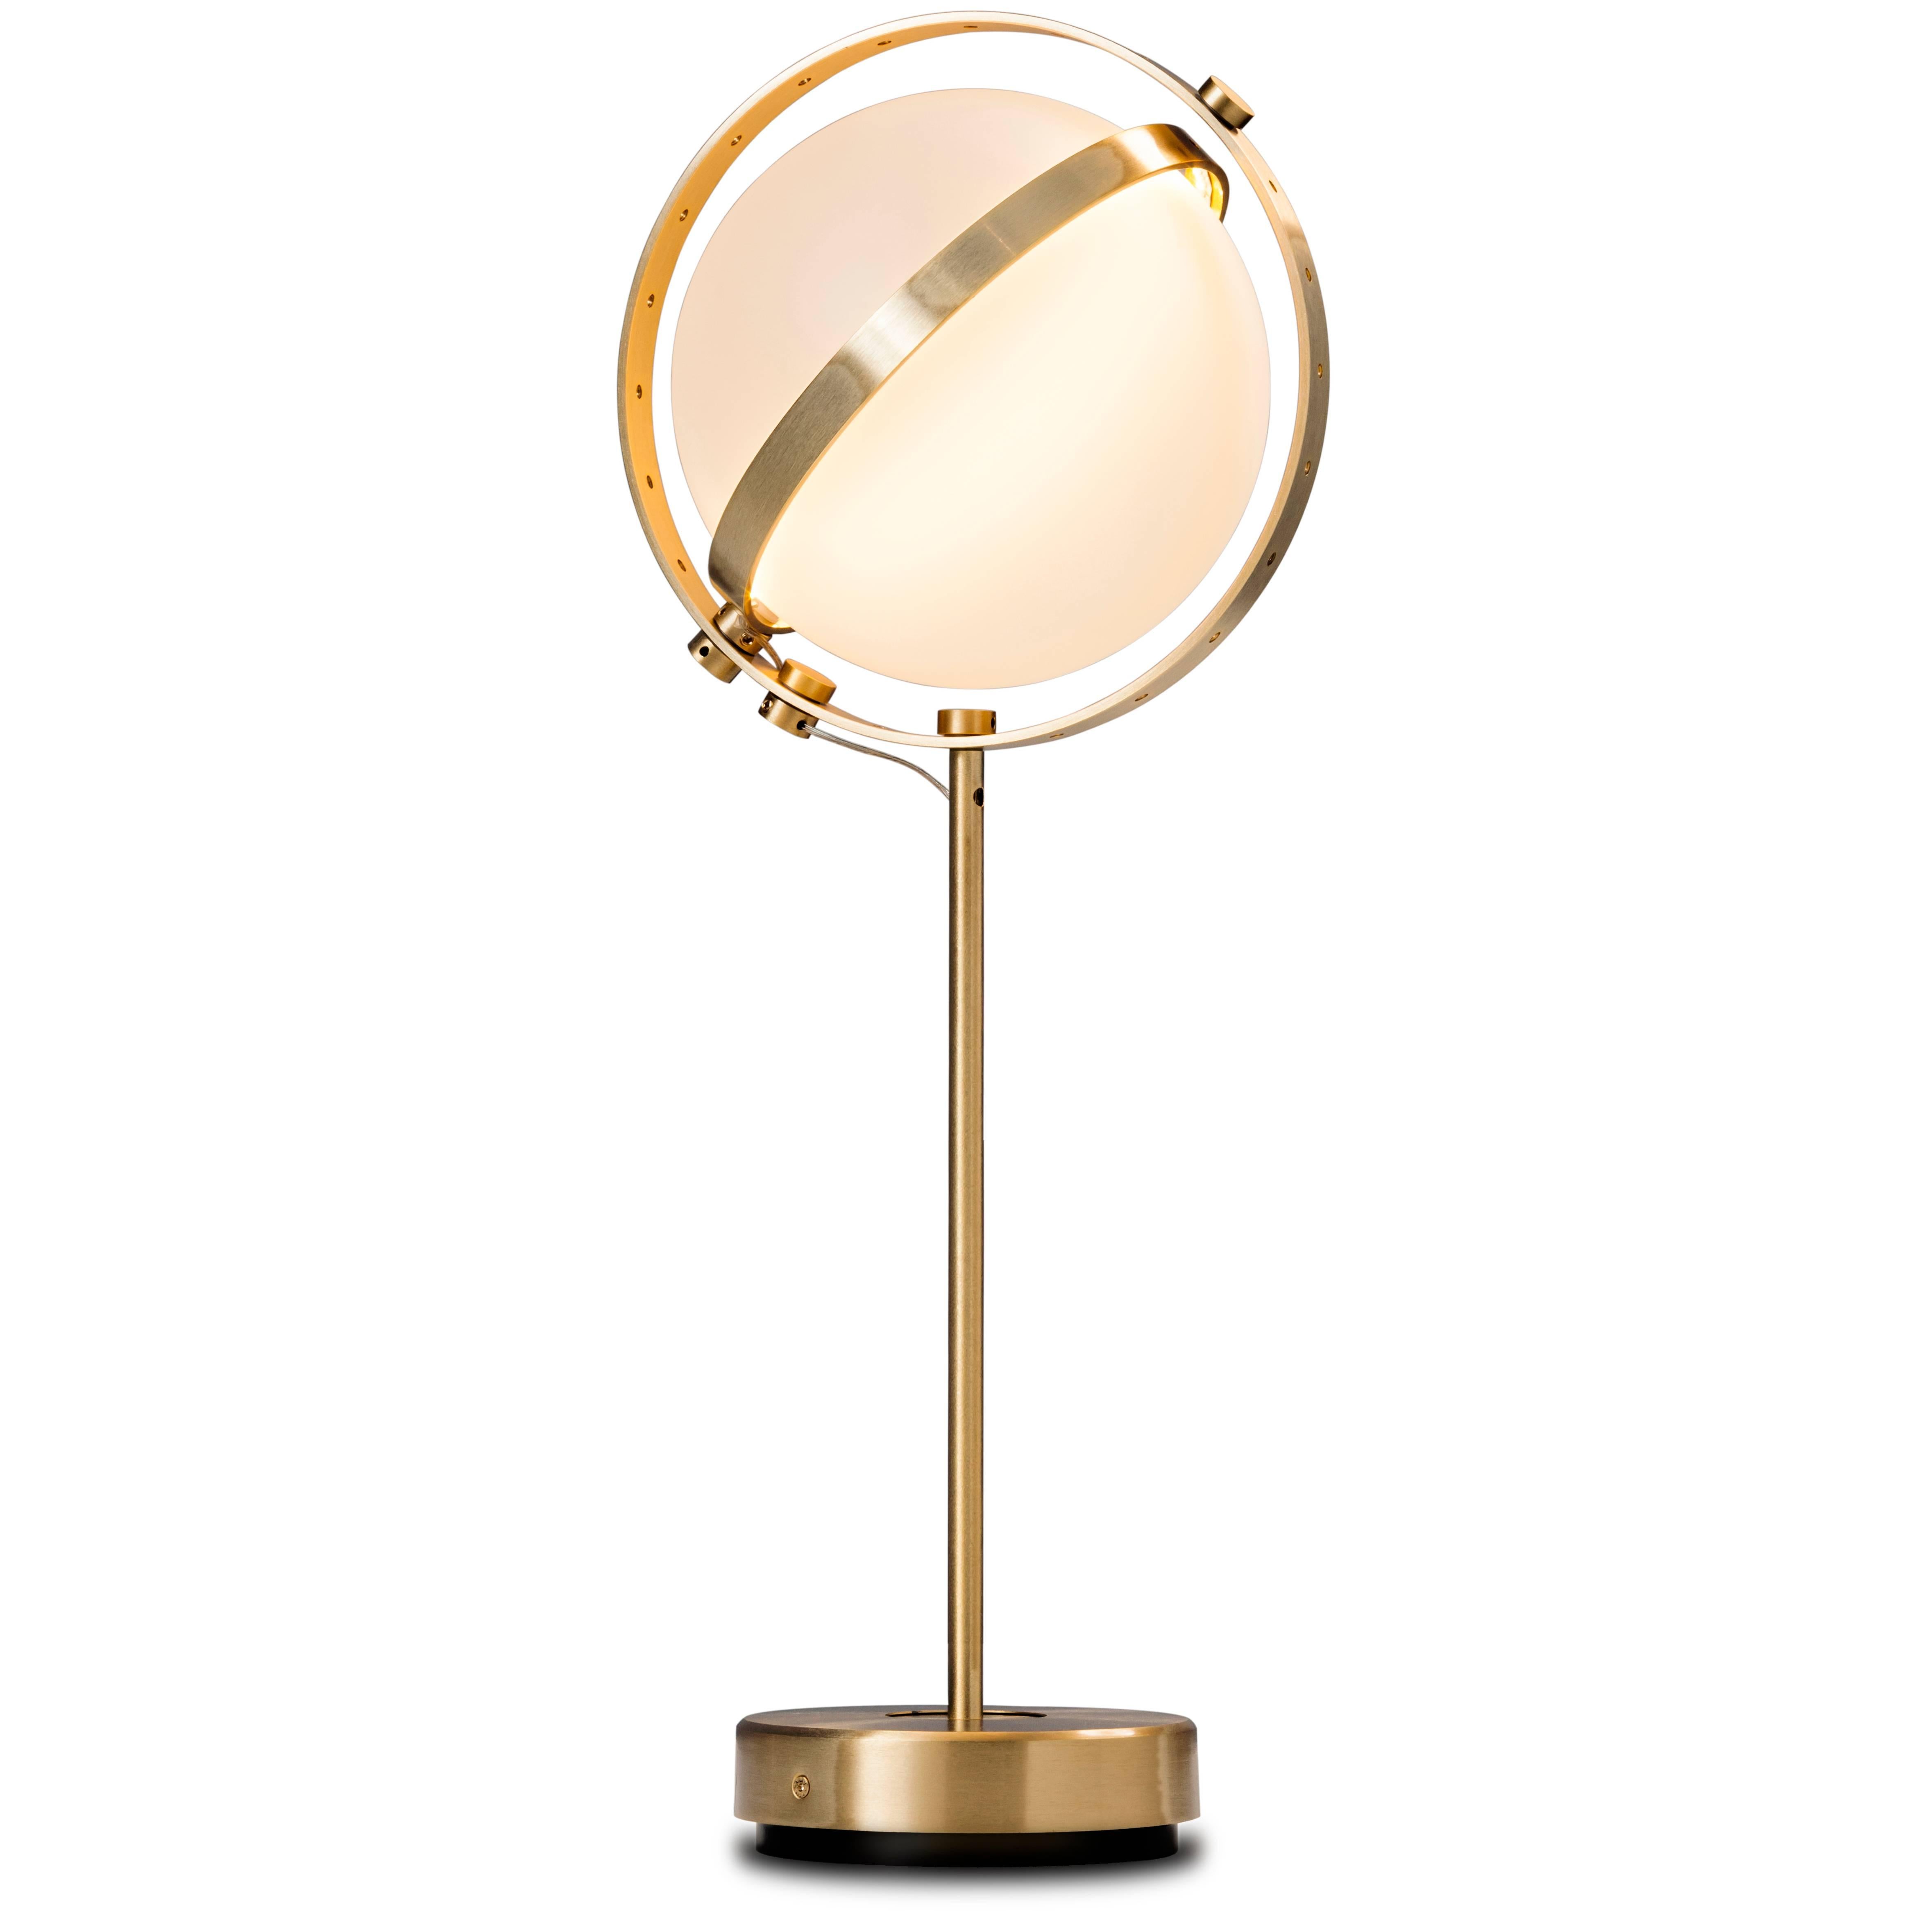 Vega is the latest family in the evolution of the Flexus series by Baroncelli. 

Flexus is a lighting system that comprises a palette of abstracted lines, curves and circles. Echoing the language of Modernist modular thinking, it captures the